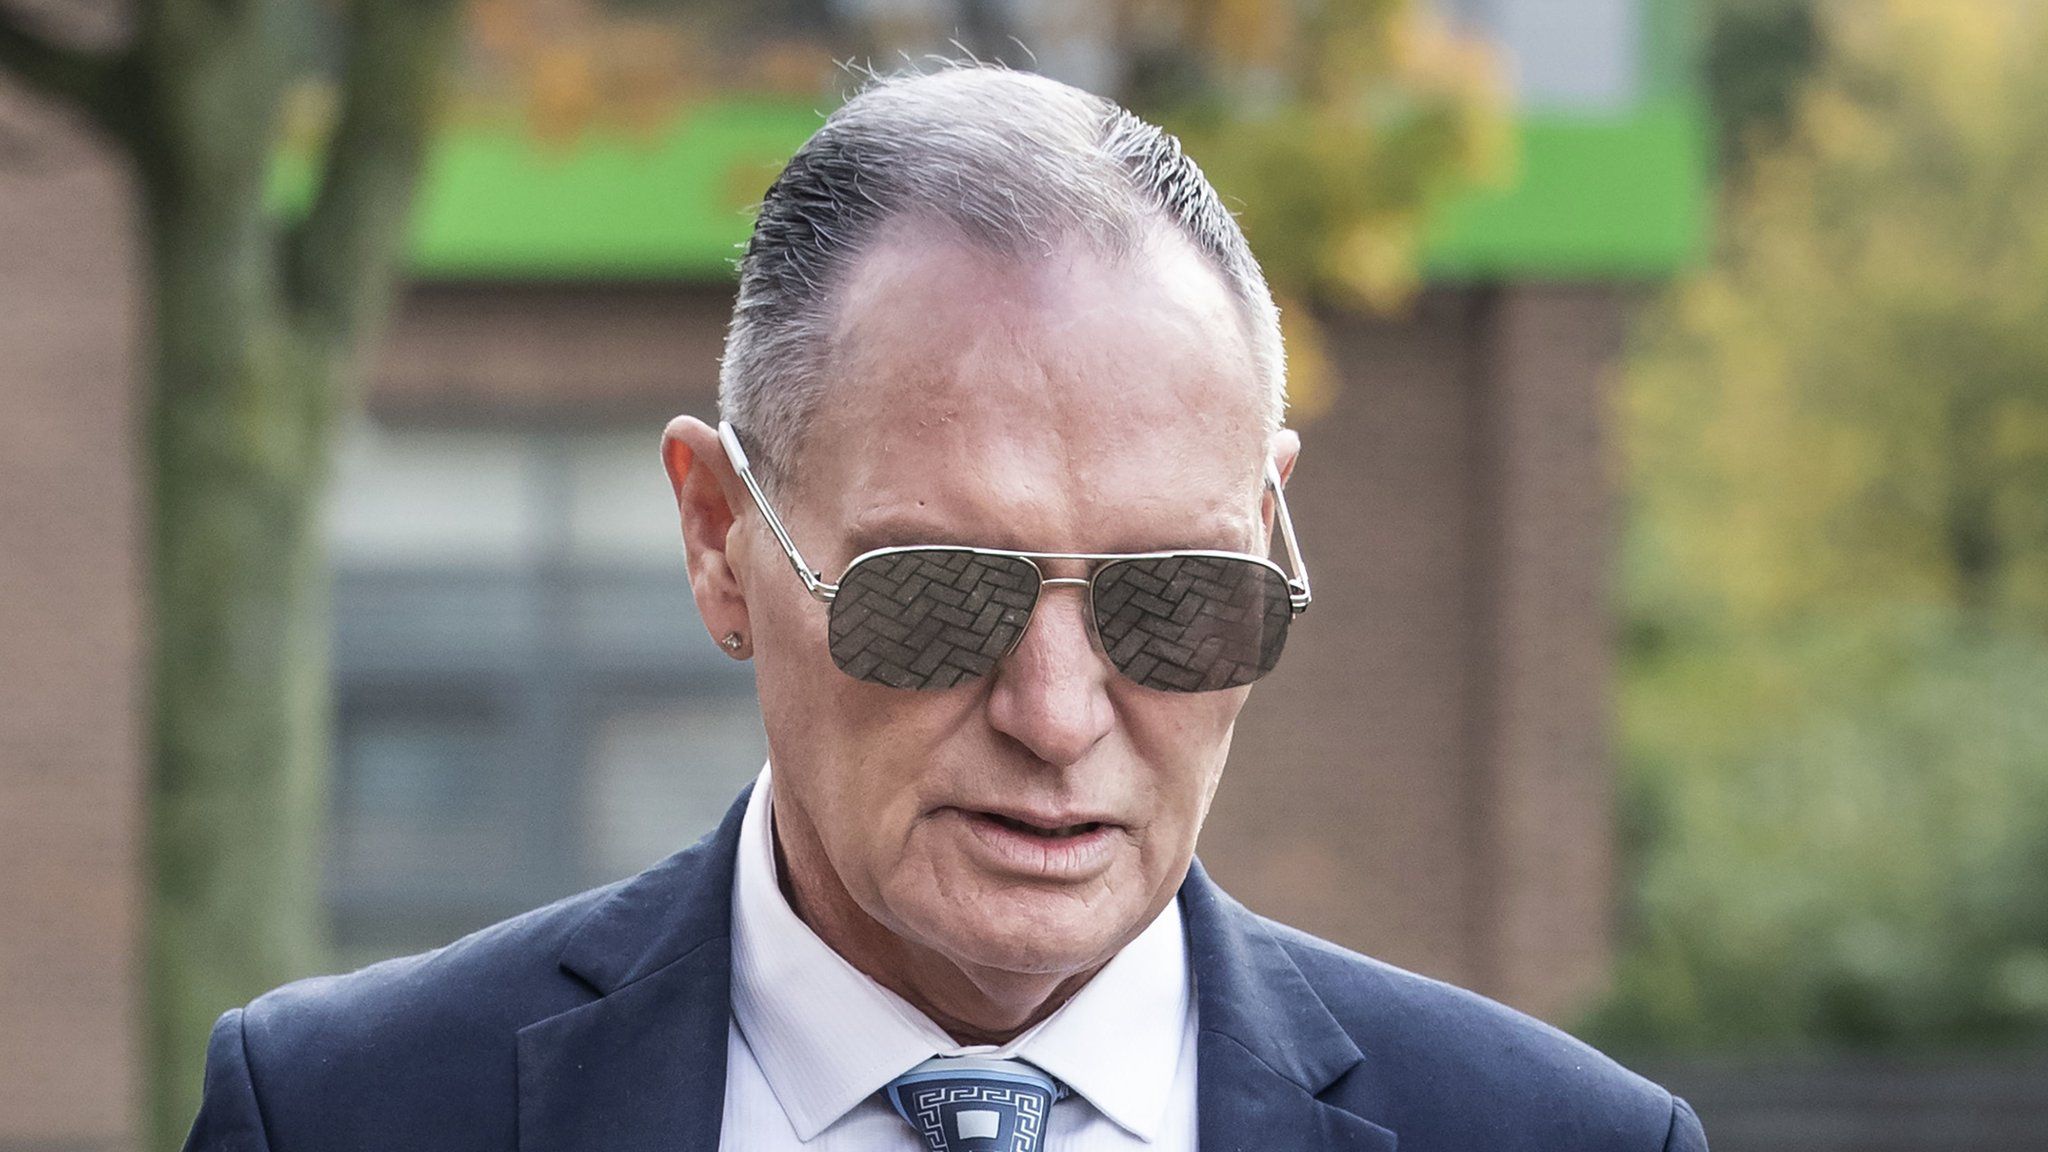 Gascoigne Paul Gascoigne Insists He Is Safe And Well After Video Prompts Fears For England